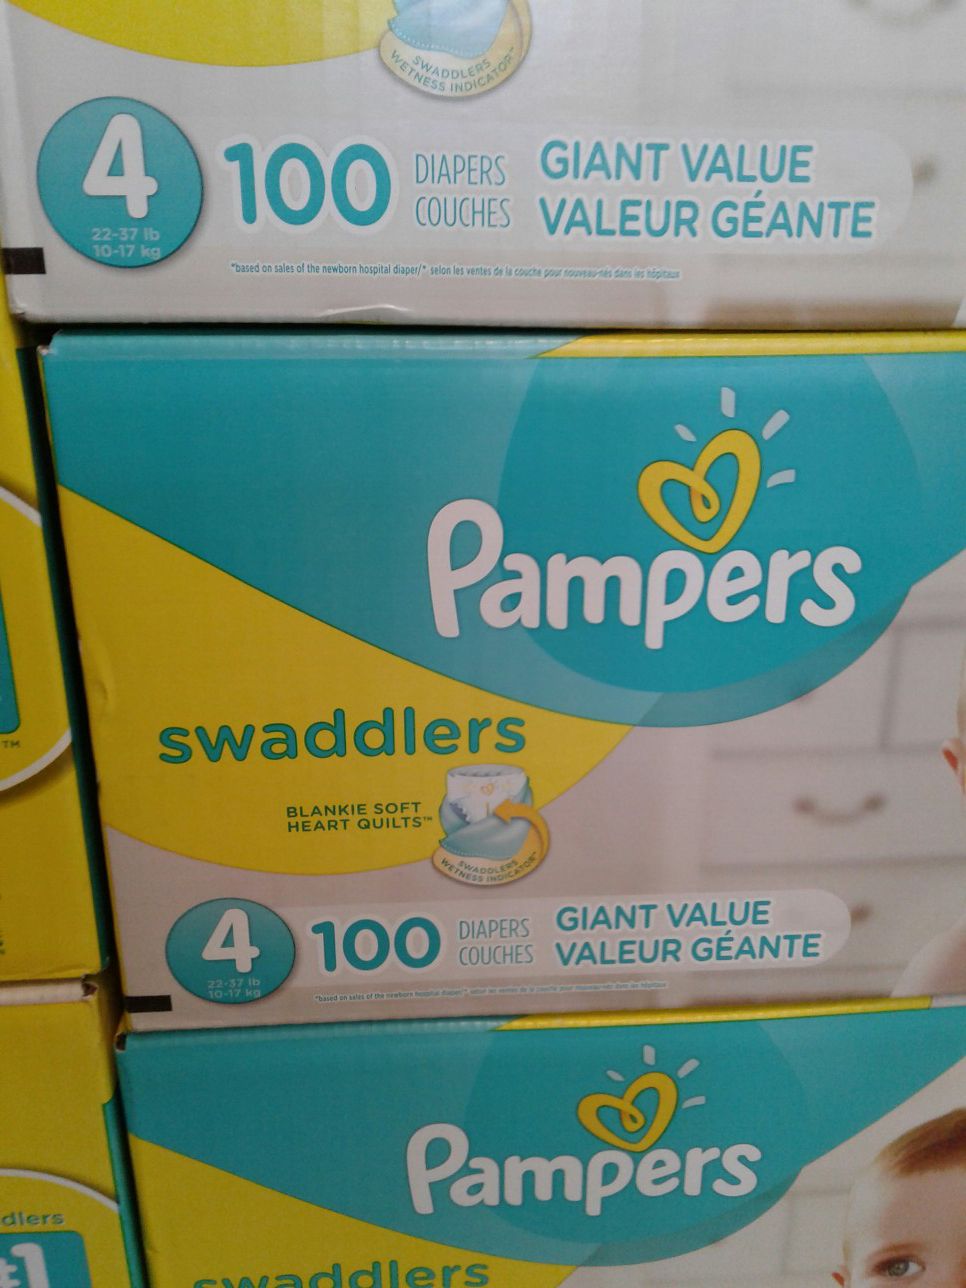 Pampers Swaddlers diapers size 4, three boxes of a hundred count at $25 each or all three for $65